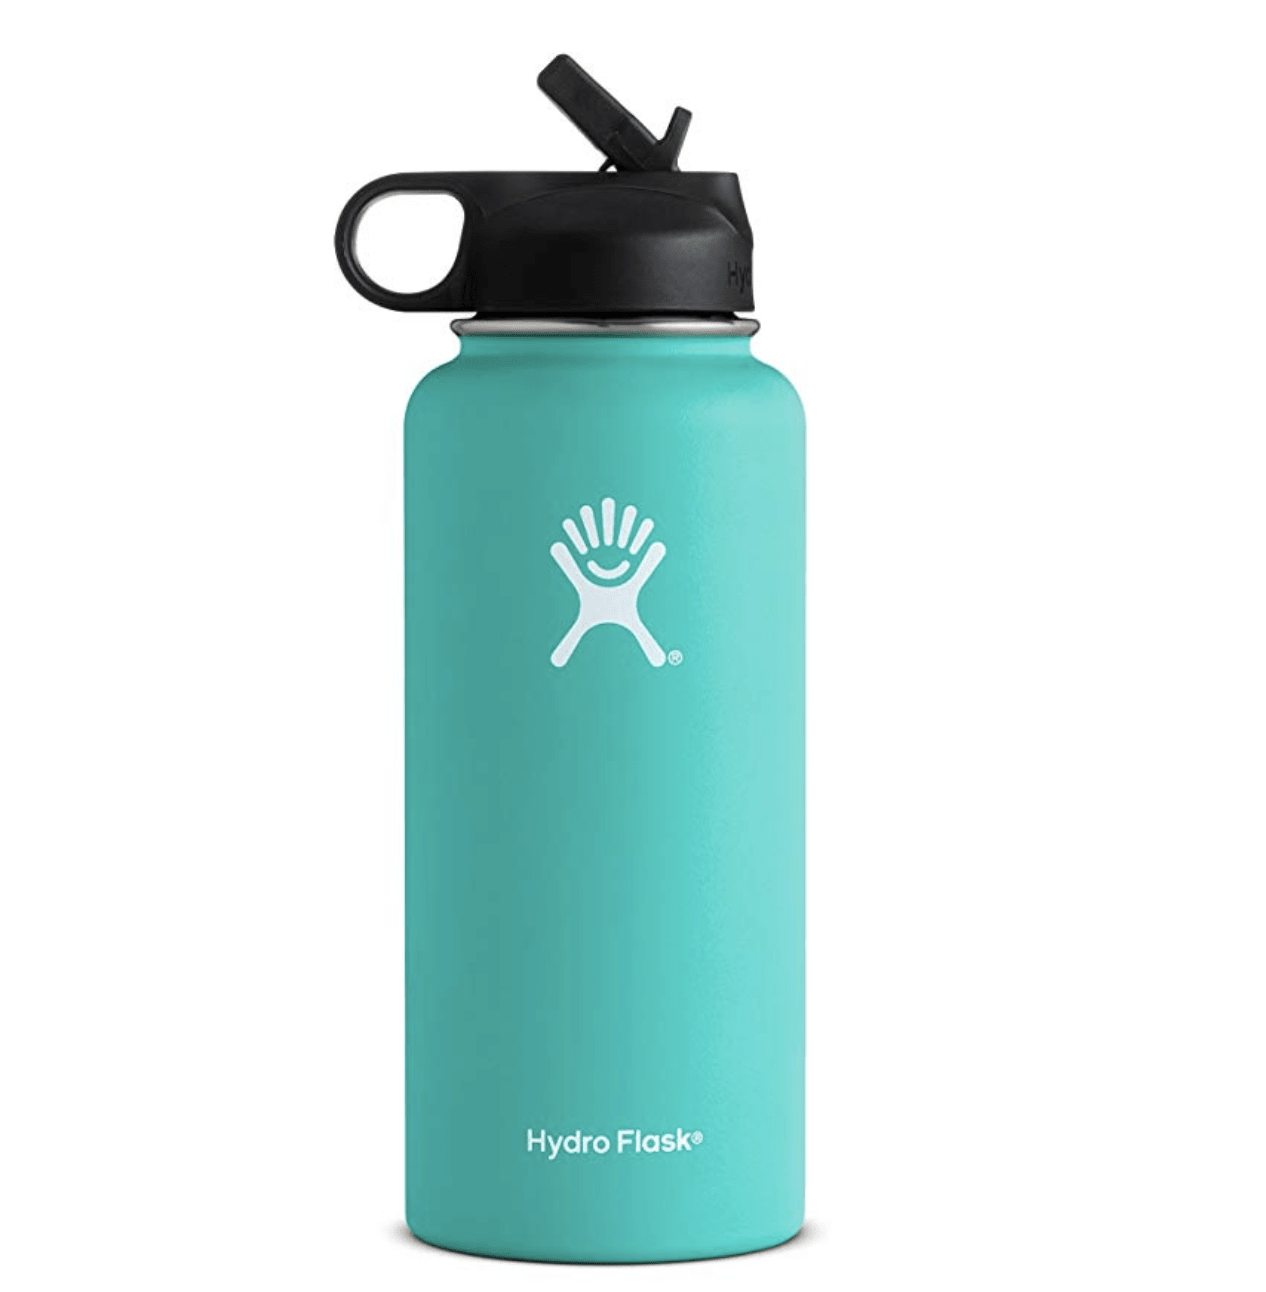 What is the best water bottle for school?